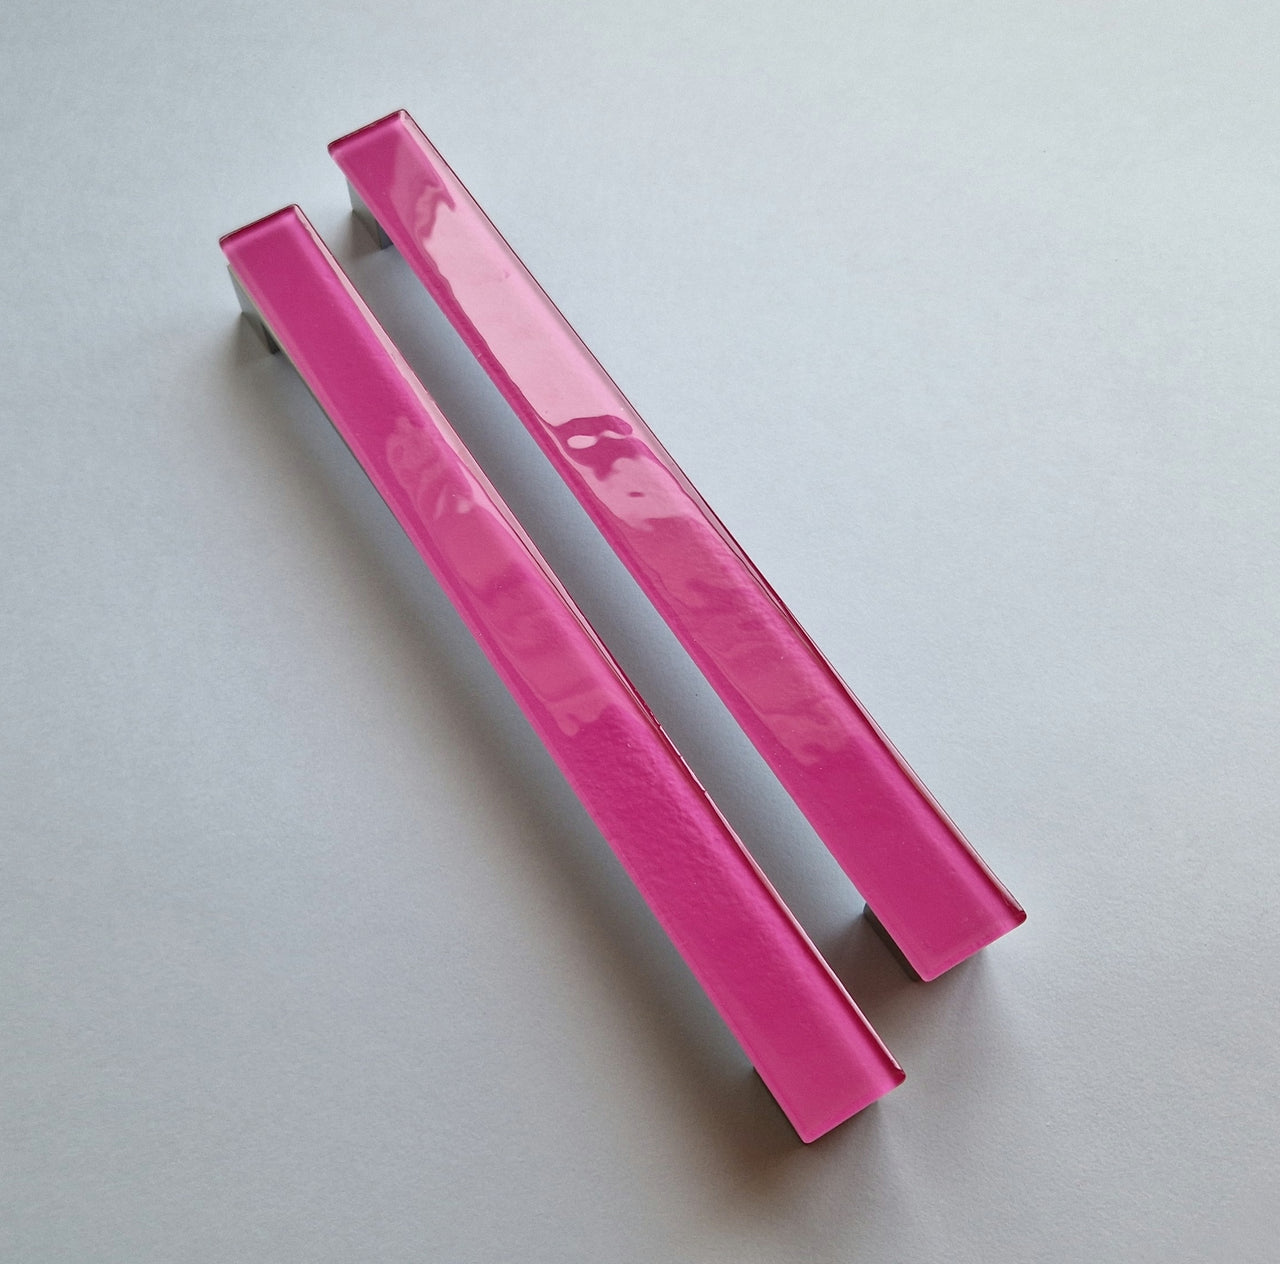 A Set of 2 Large Glass Pulls in Matte Pink. Artistic Fuchsia Pink Furniture Glass Pull - 00--